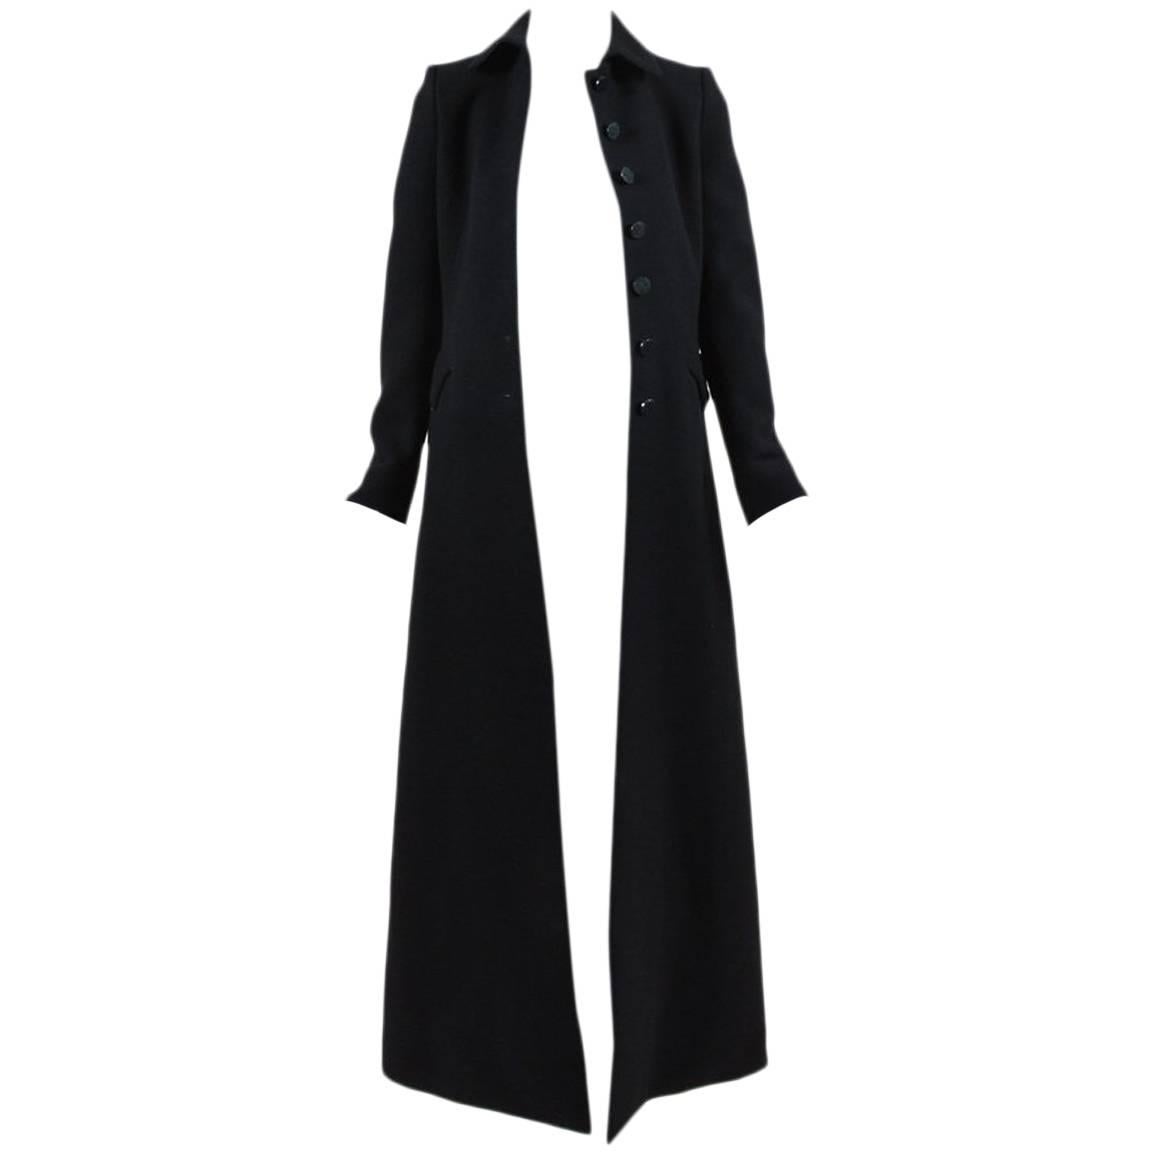 Alaia NWT Black Wool Paneled Single Breasted Long Sleeve Trench Coat SZ 38 For Sale